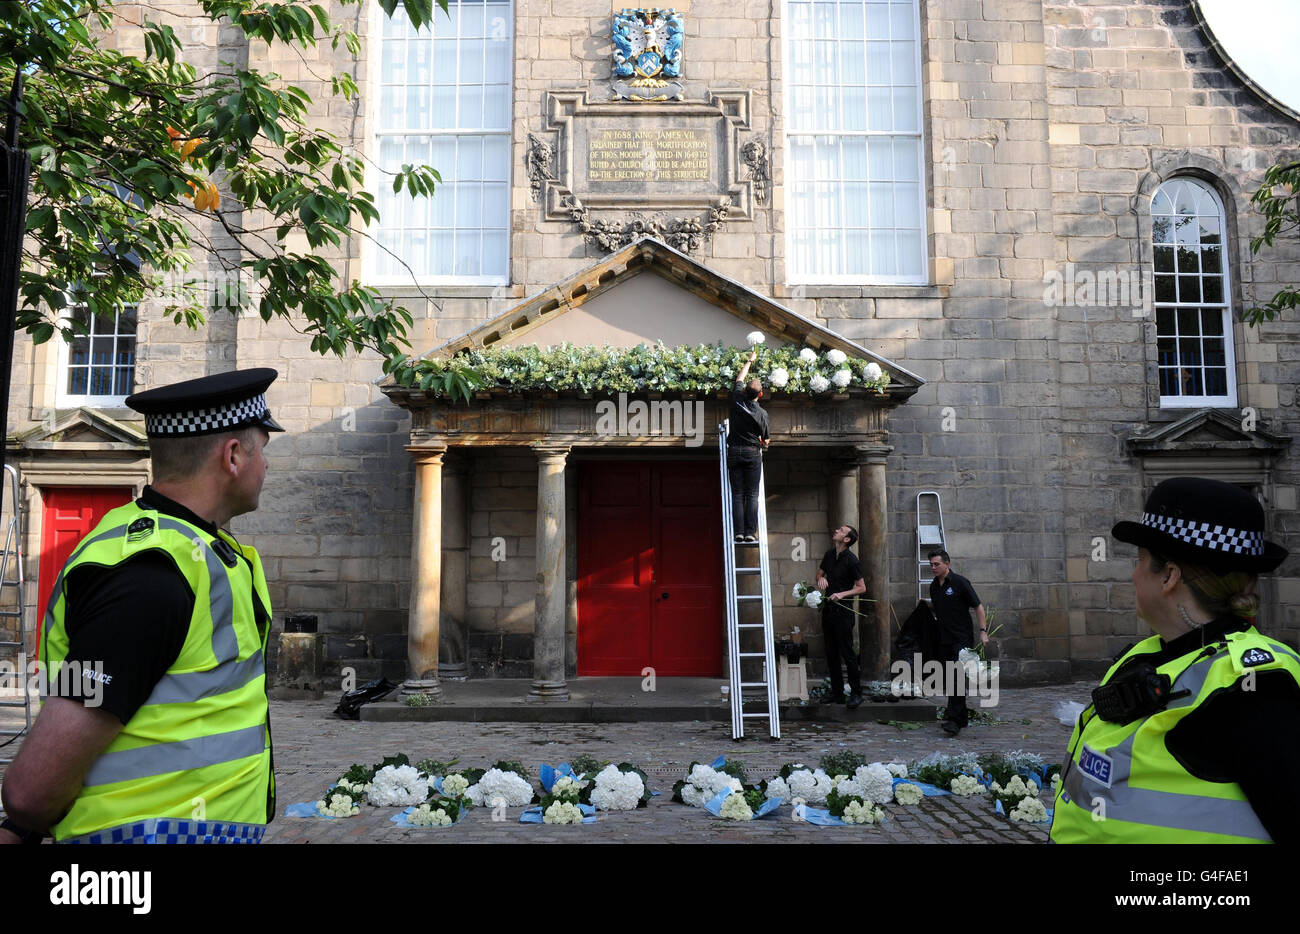 Flowers are placed at the Canongate Kirk, in Edinburgh, as final preparations continue ahead of the wedding of Zara Phillips and Mike Tindall. Stock Photo